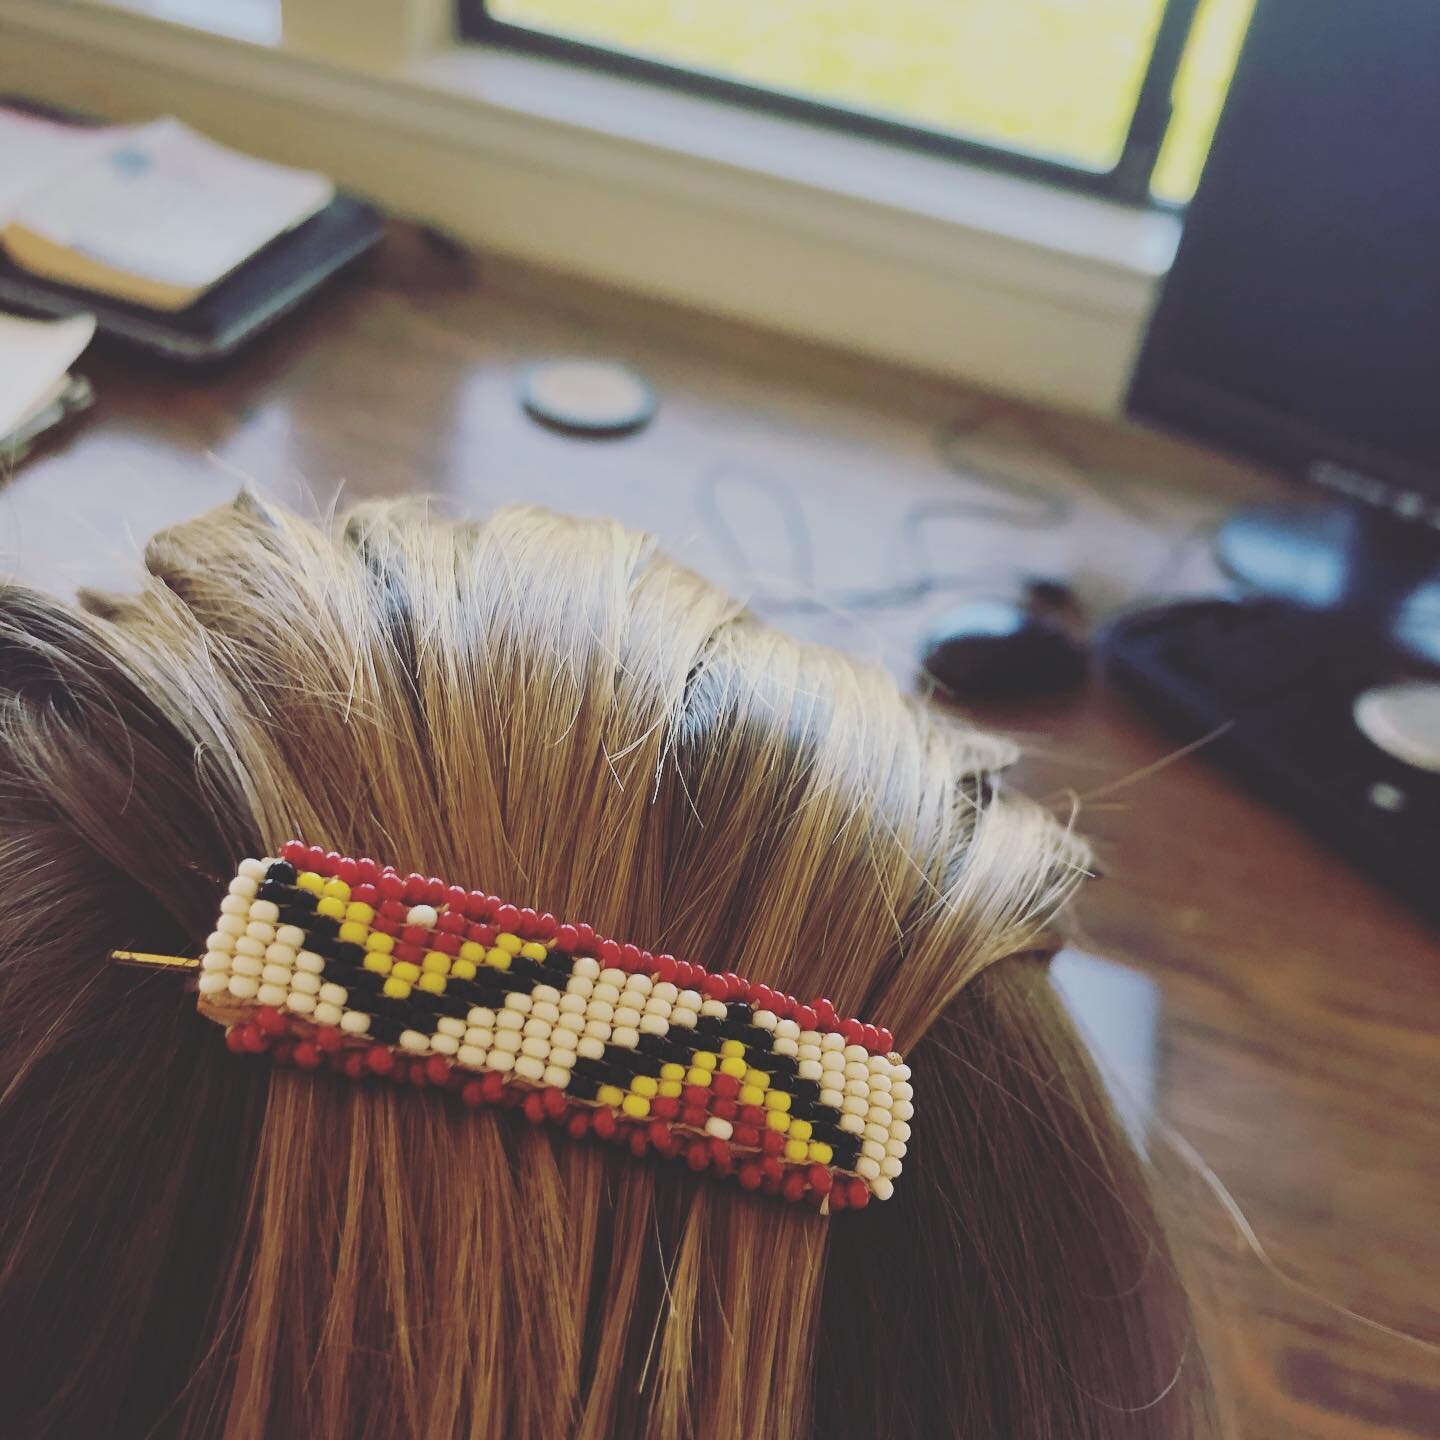 My uncle left this barrette for me. My mom found it in a drawer and passed it to me in the palm of her hand. It was given to my uncle, a doctor, by a Native American woman who showed up at his practice one day 44 years ago in labor. With no medical i